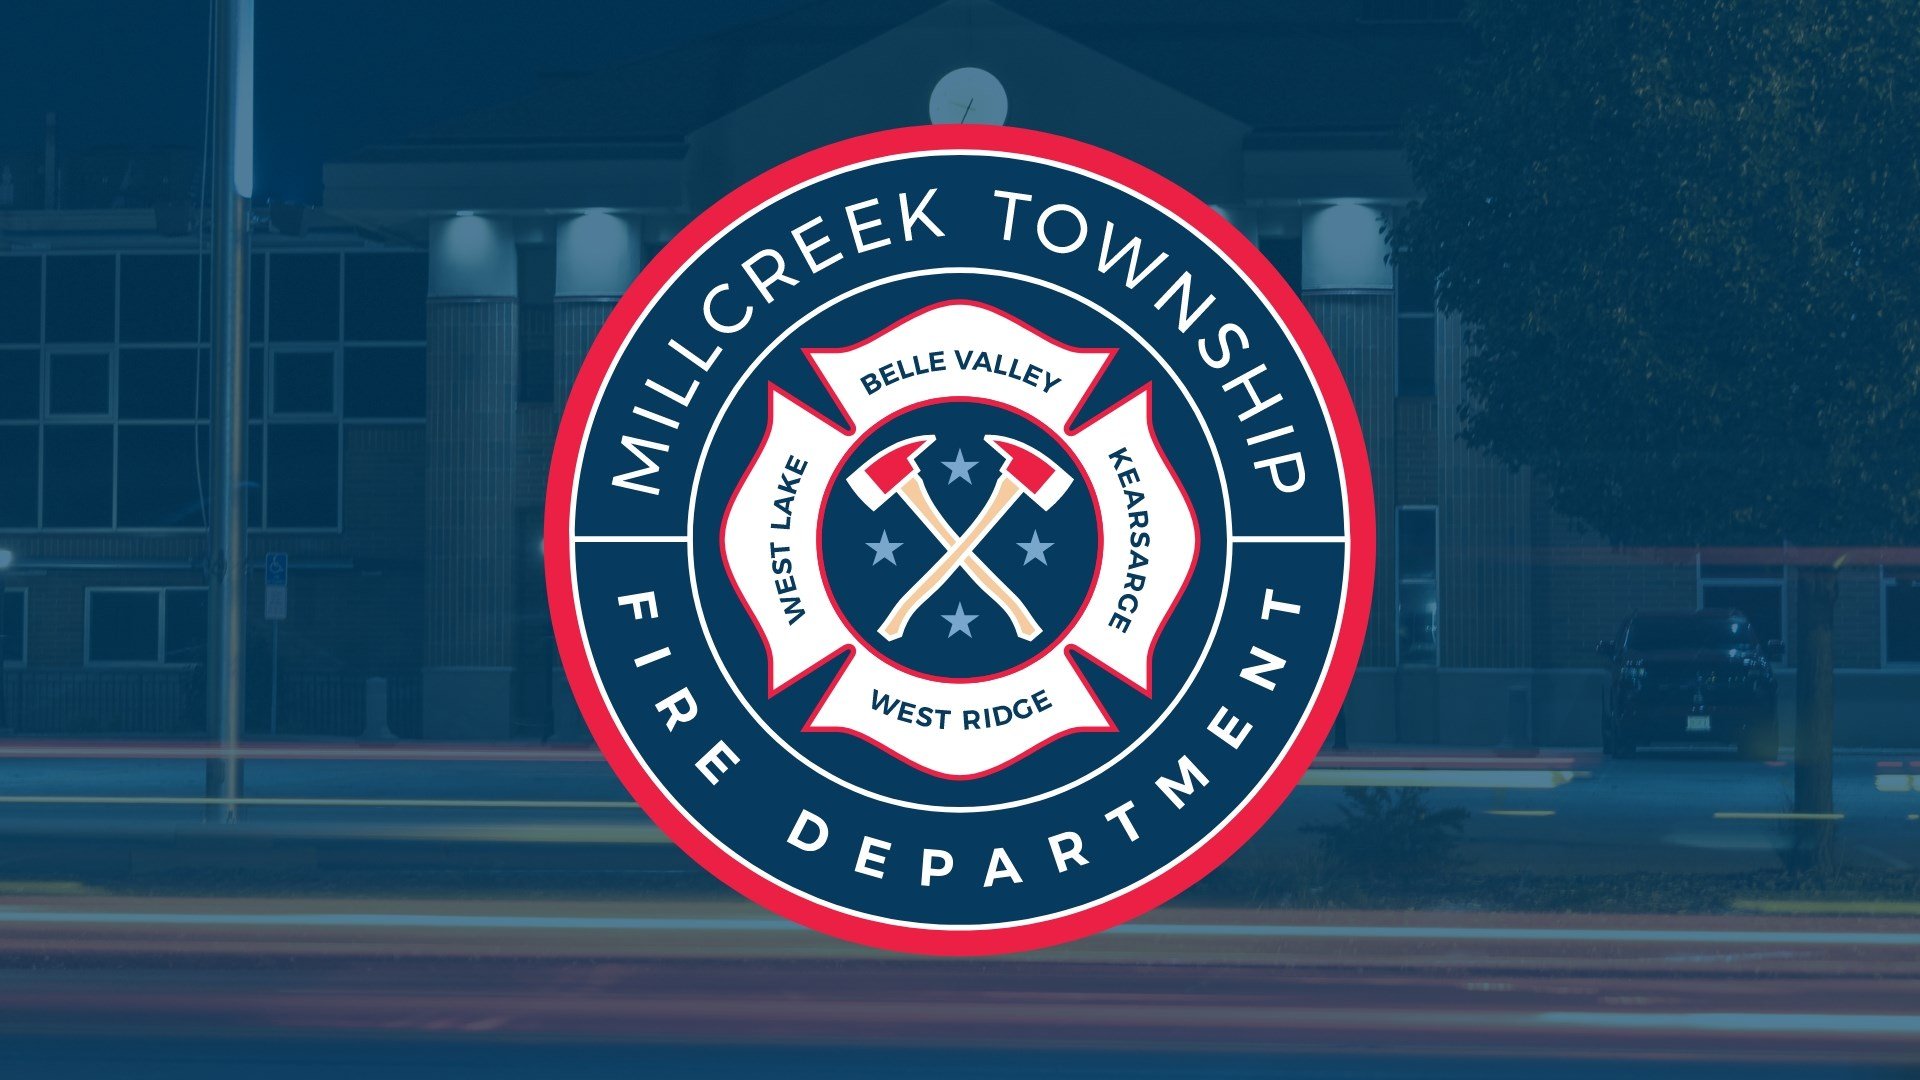 Millcreek Township to Host Coffee with Chief Event at Brew Ha Ha